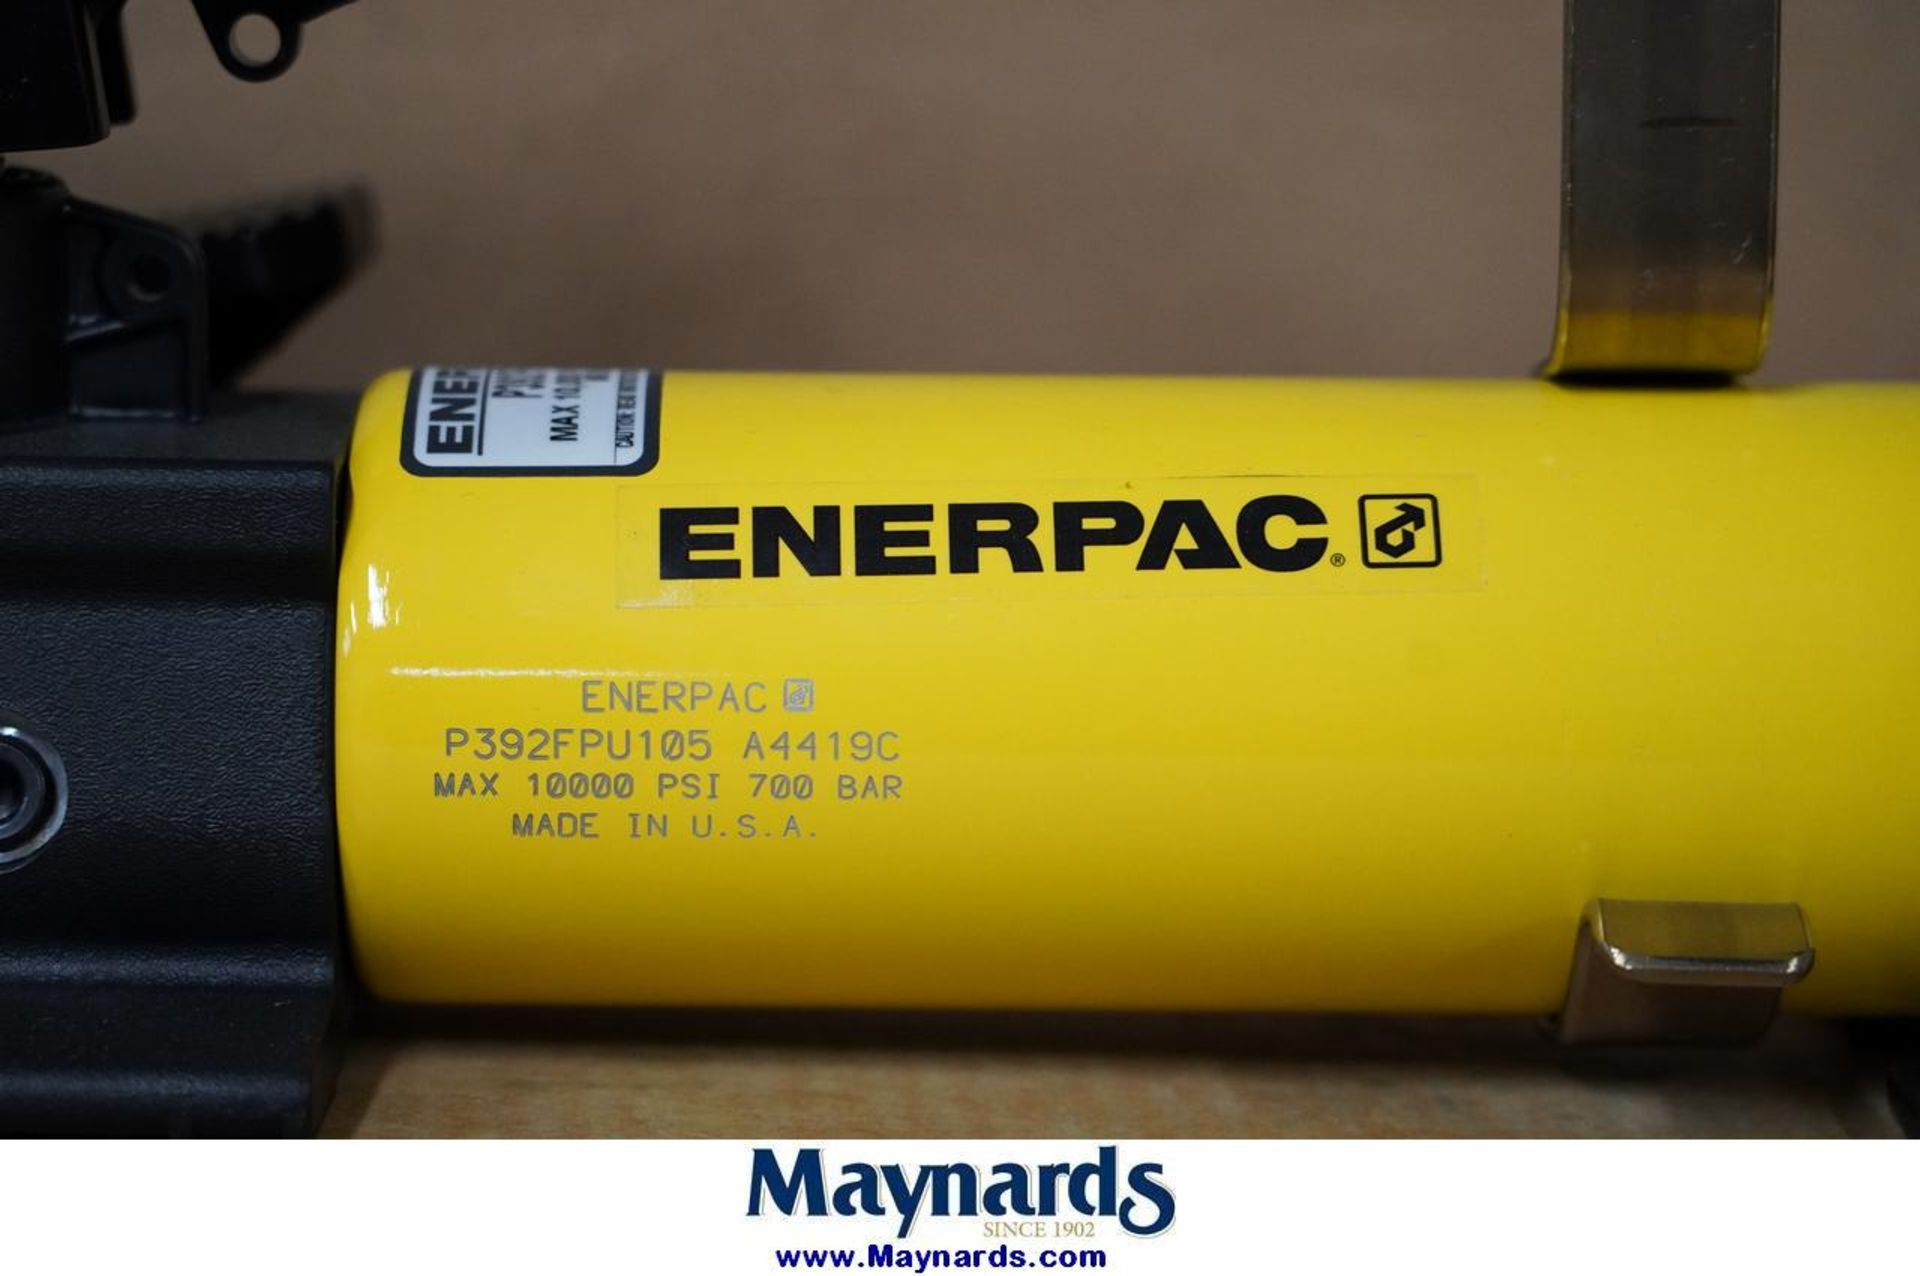 Enerpac P392FPU105 Two Speed Foot Pump - Image 2 of 3